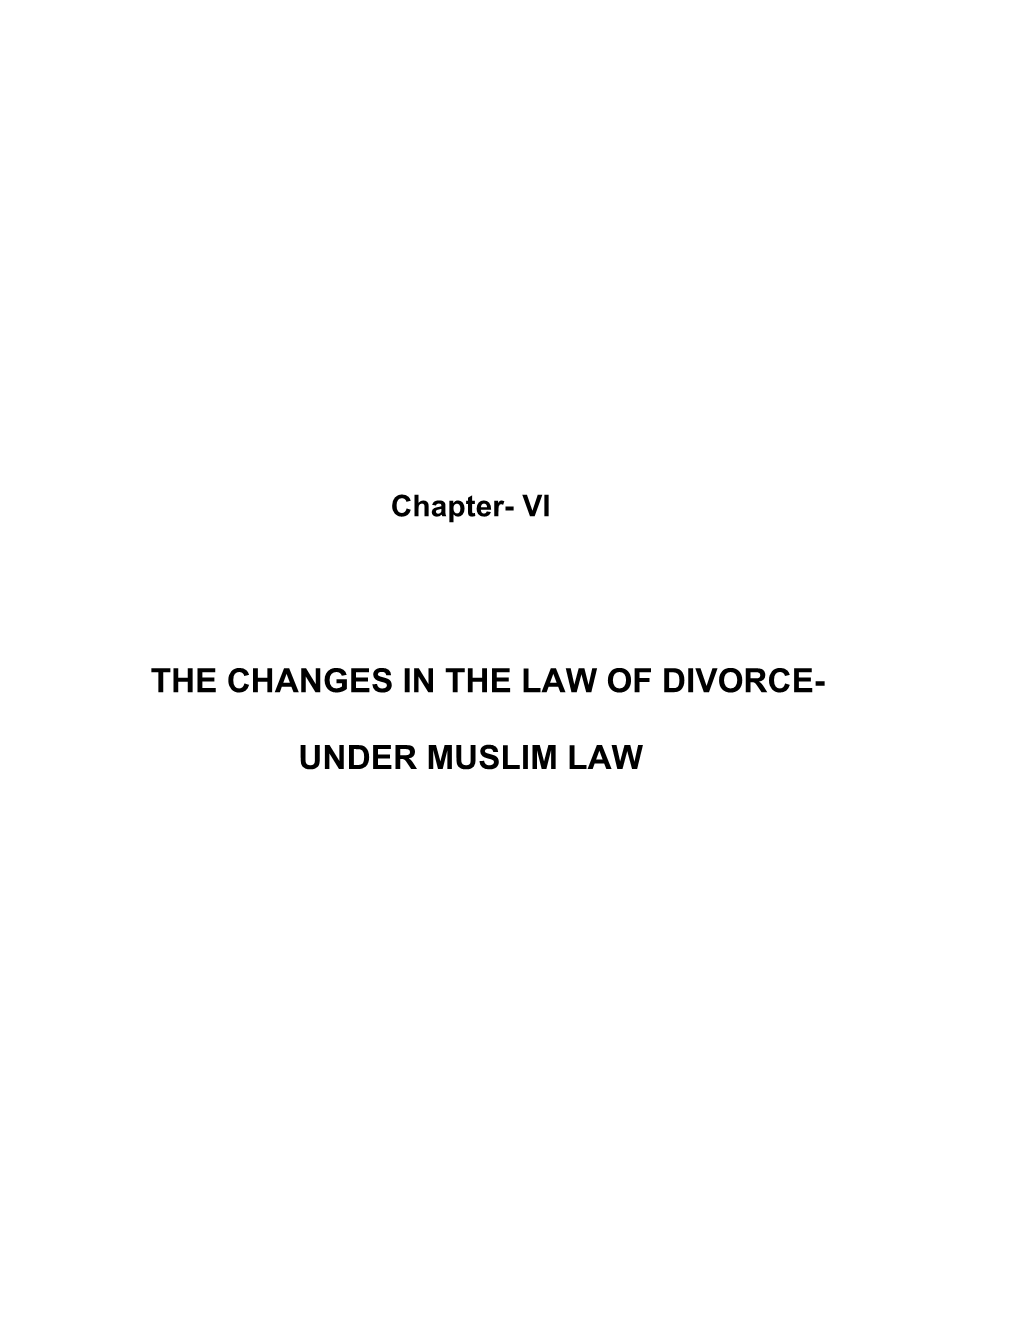 The Changes in the Law of Divorce- Under Muslim